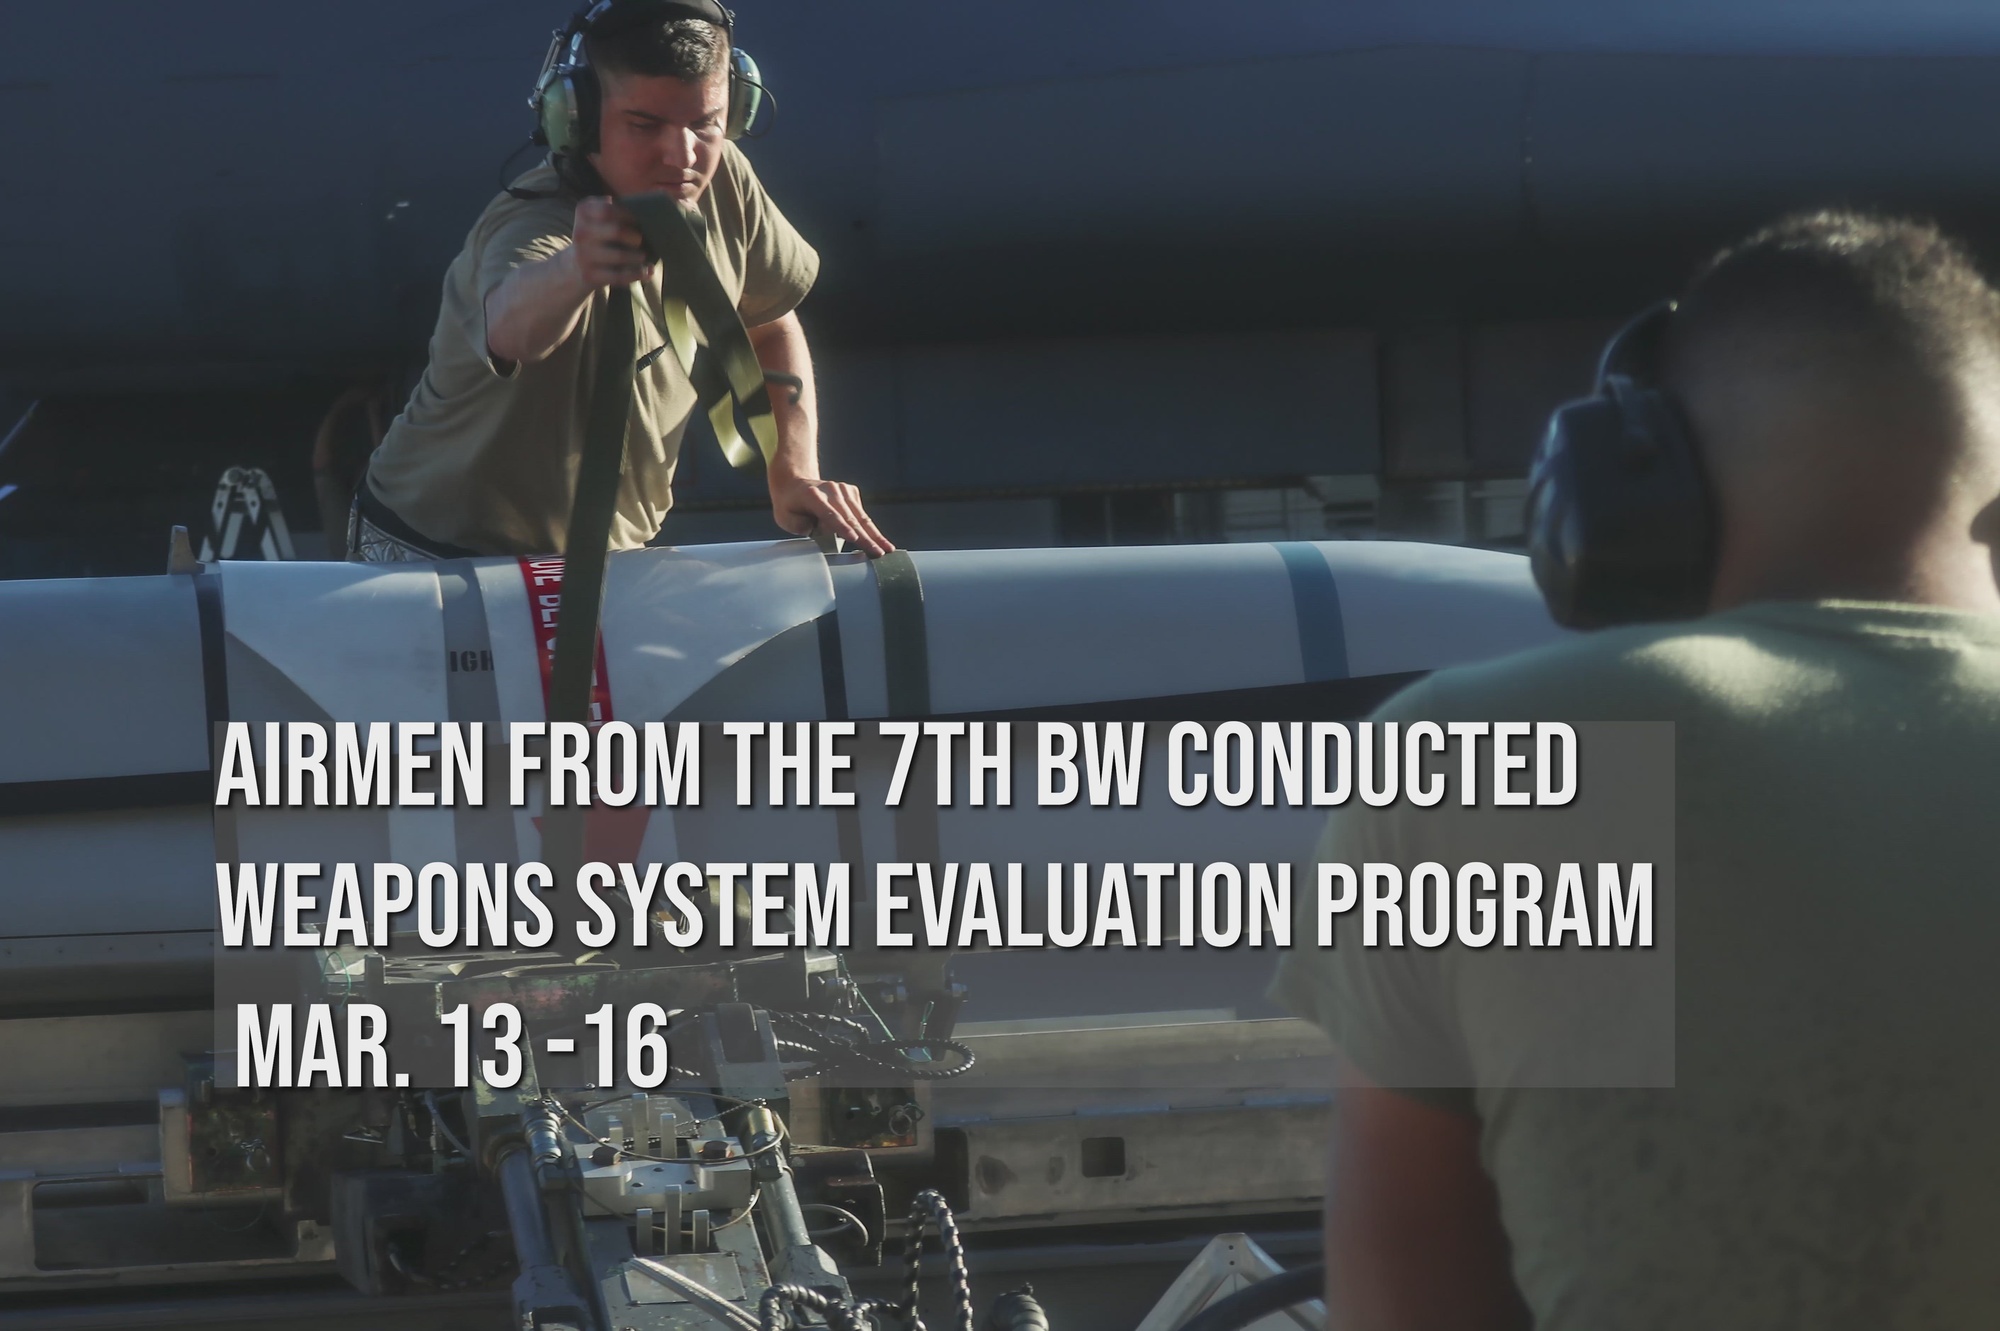 Dyess participated in Exercise Combat Hammer, a Weapons System Evaluation Program meant to test live-fire weapons systems during realistic combat missions.